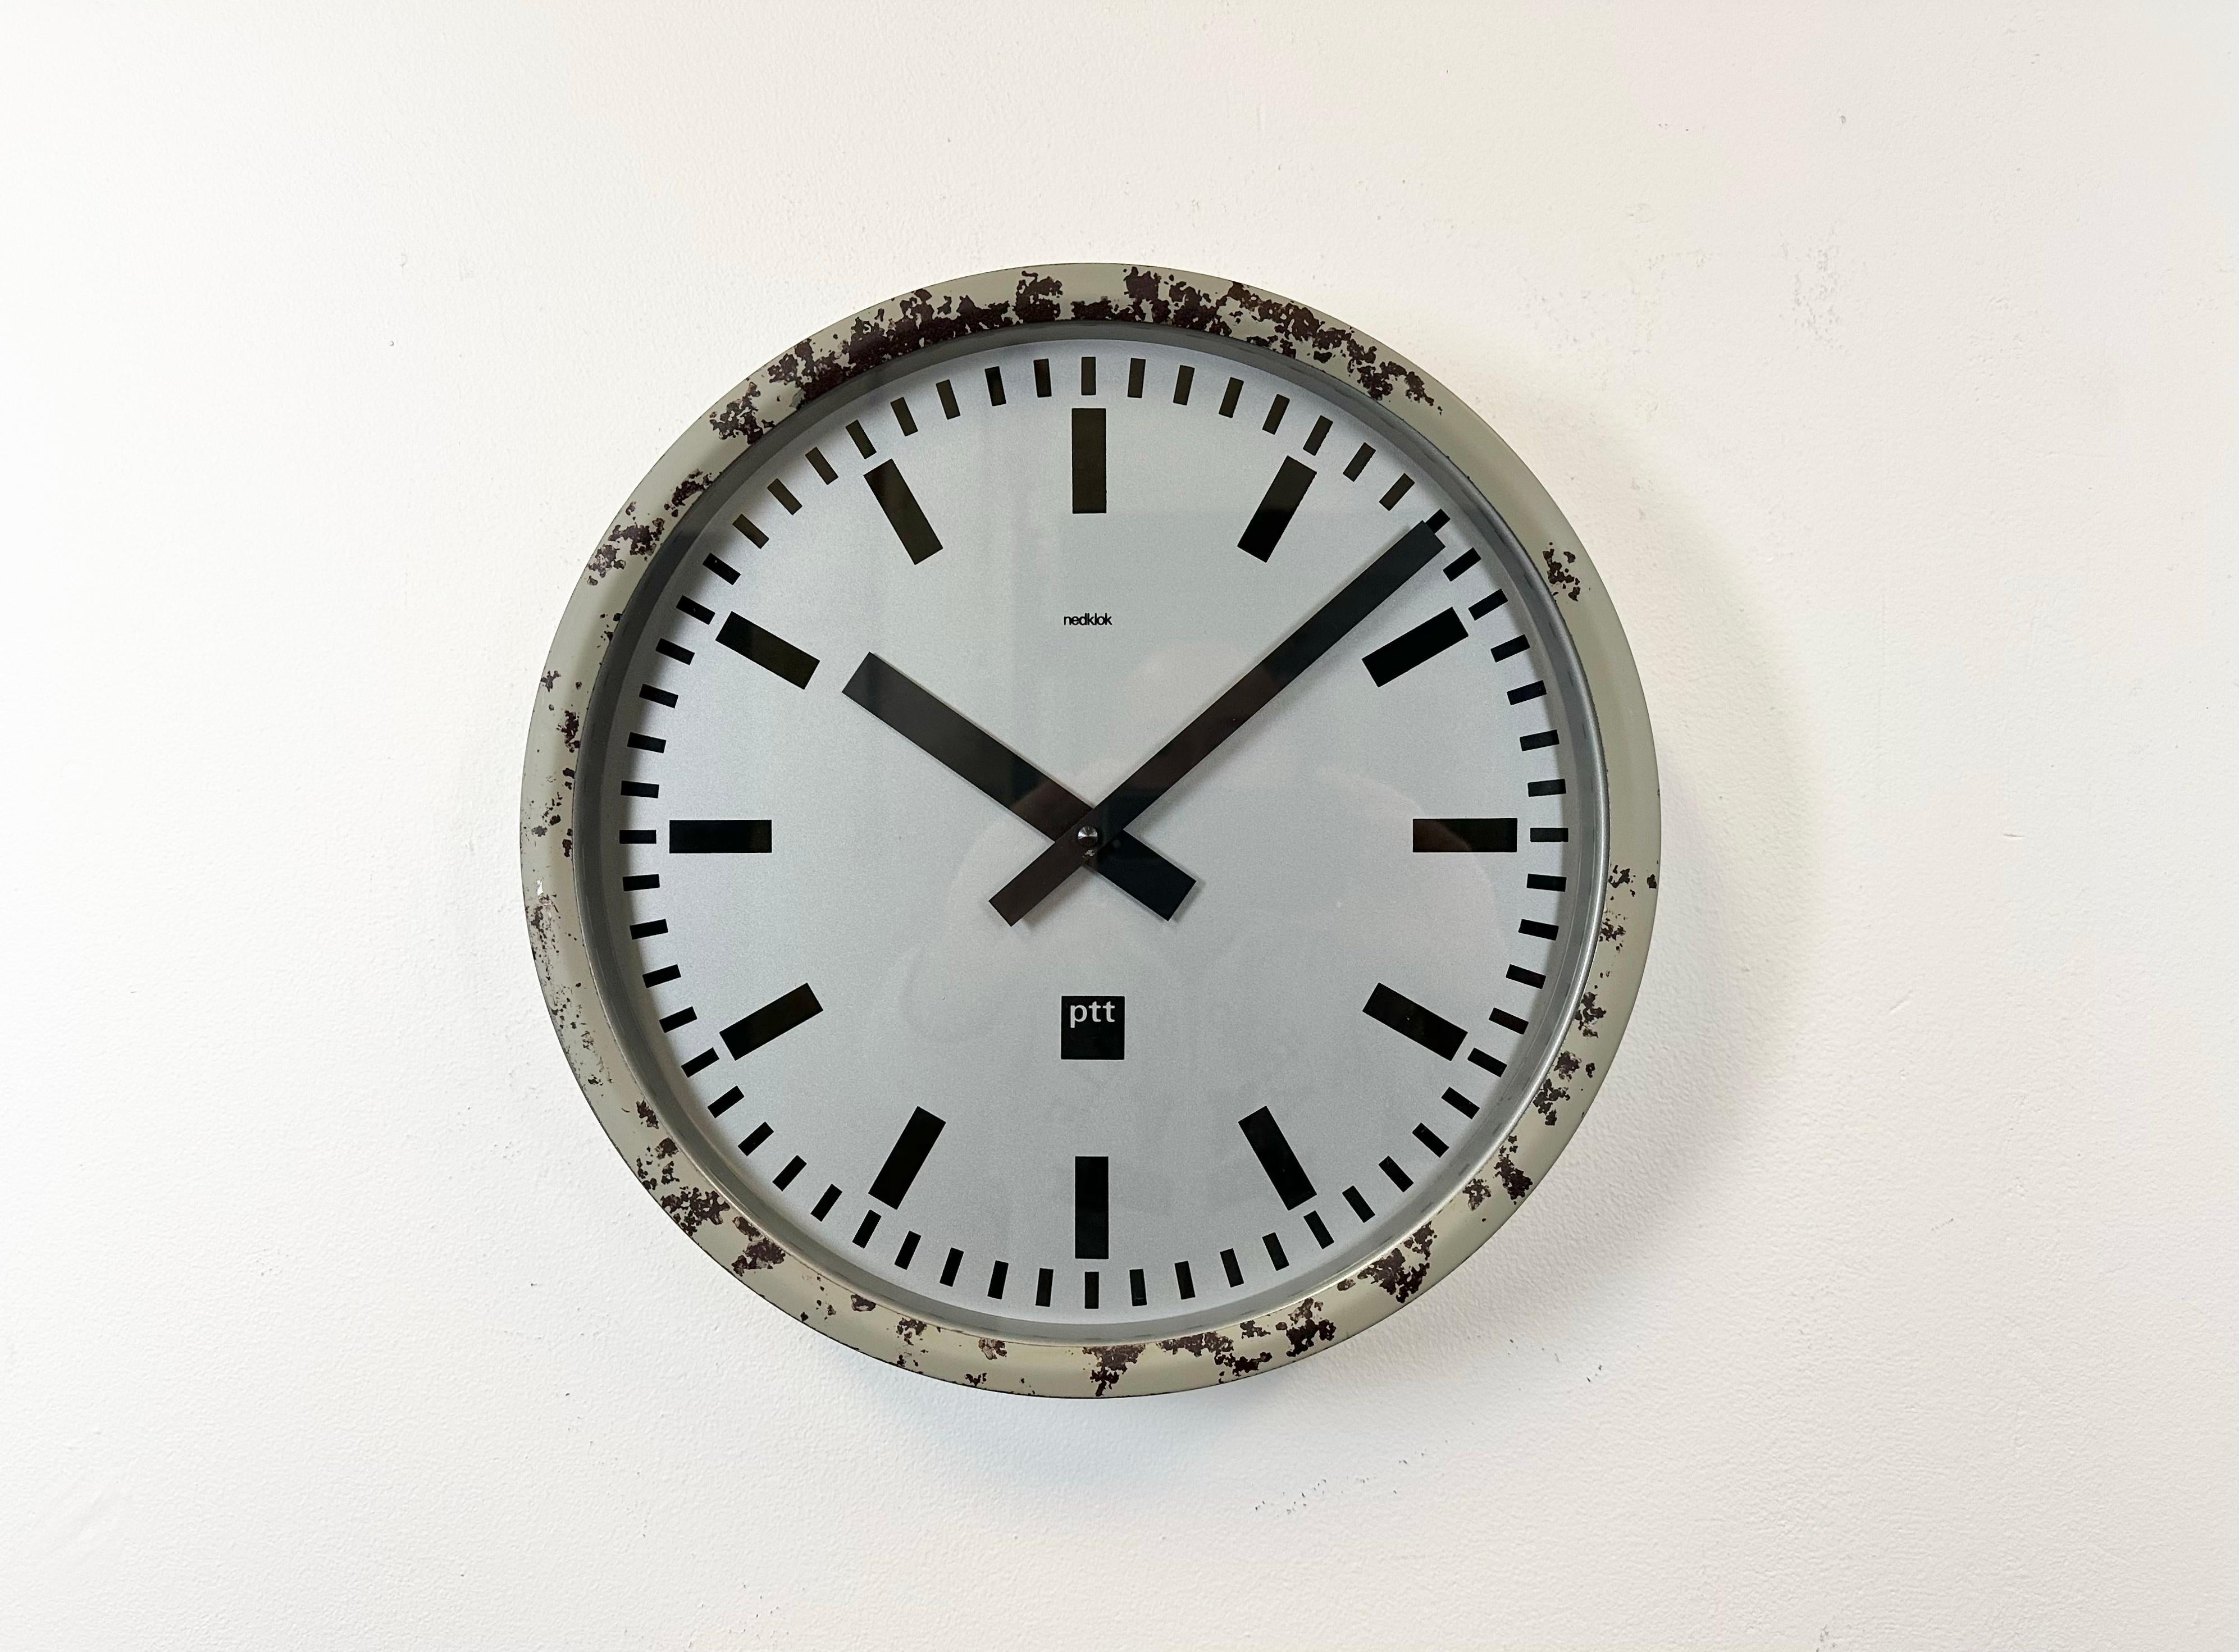 Nedklok wall clock was made in Netherlands during the 1960s. It features a grey iron frame, a metal dial, an aluminium hands and clear glass cover. The piece has been converted into a battery-powered clockwork and requires only one C- LR14 battery.